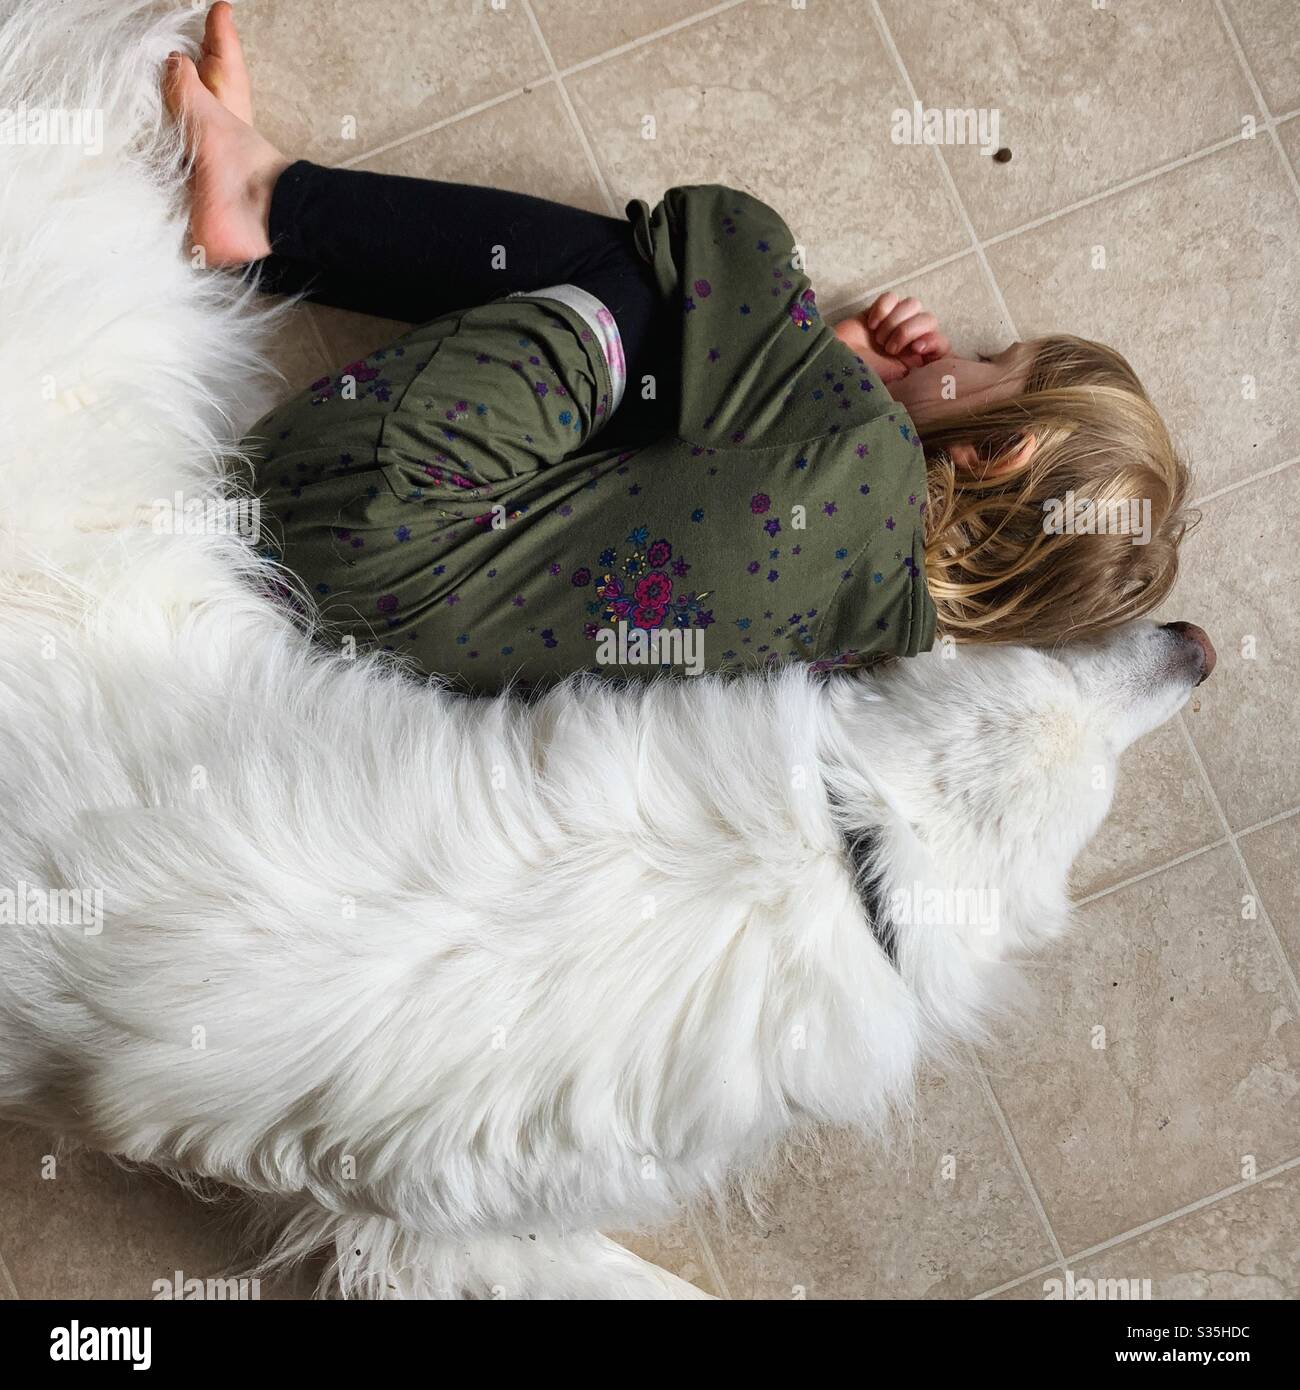 A dog and a girl napping together. Stock Photo